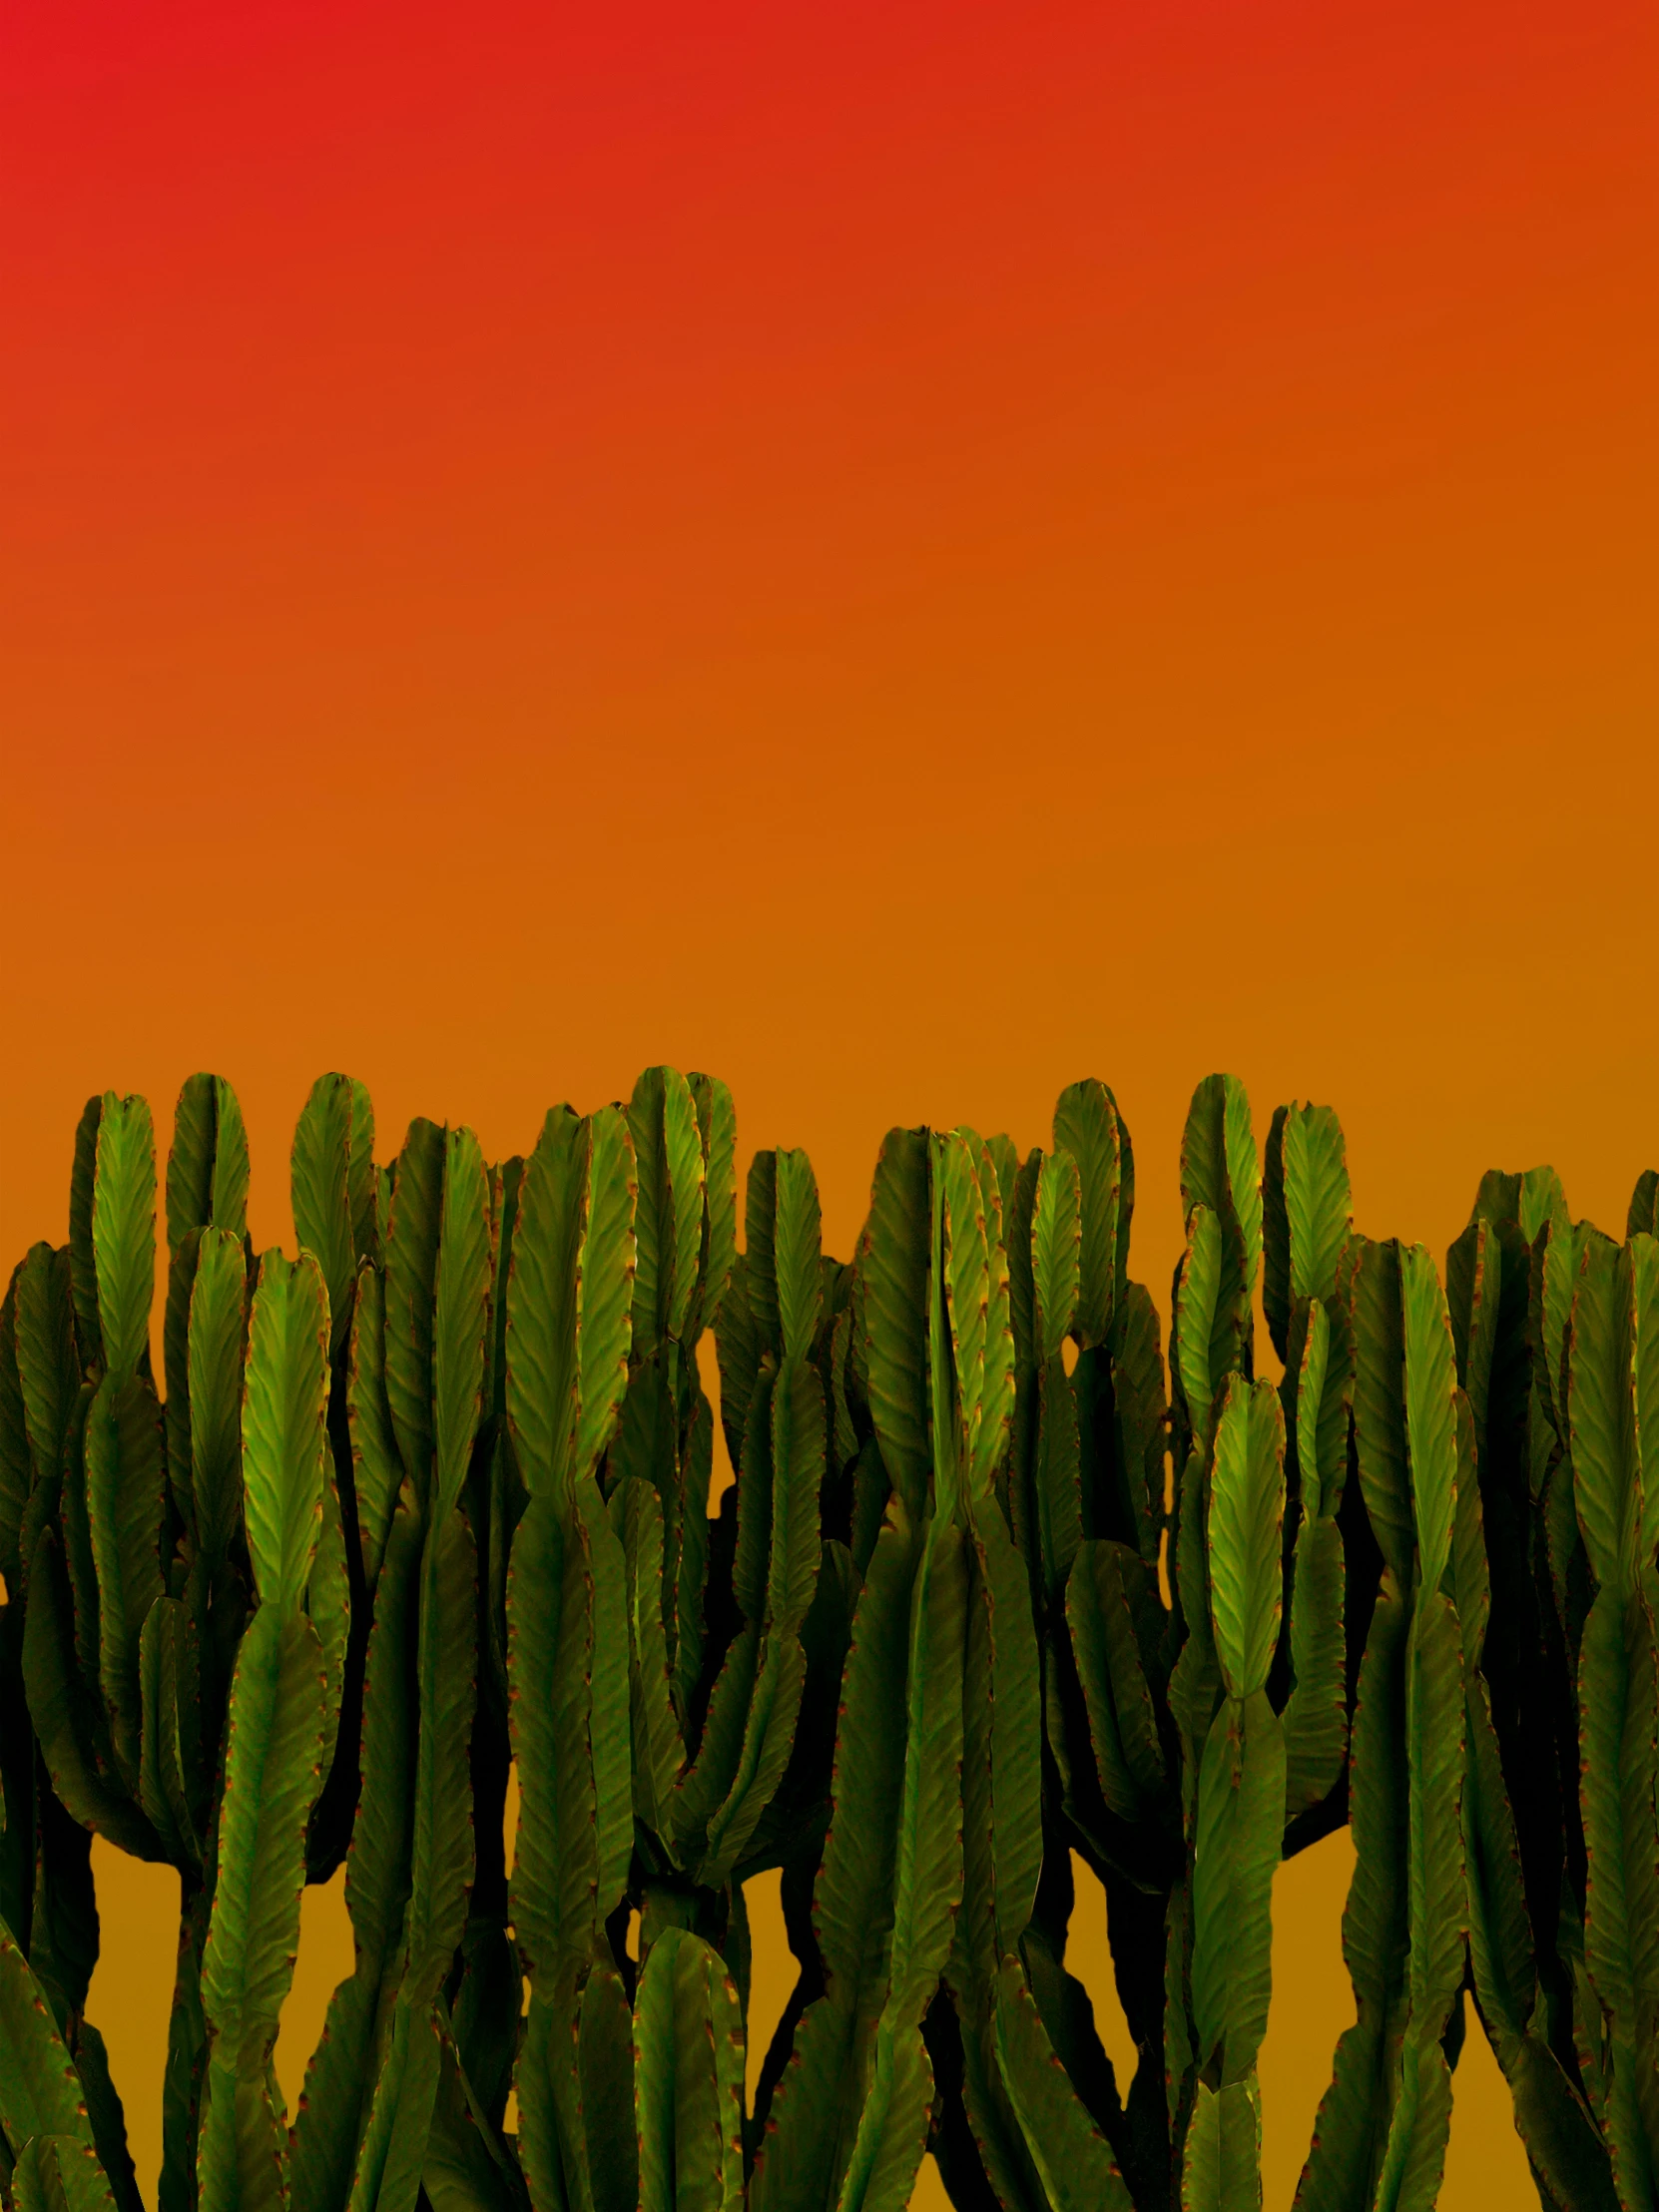 a group of cactus plants sitting next to each other, an album cover, inspired by Mike Winkelmann, pexels contest winner, magic realism, gradient orange, ((sunset)), solid background, mexican standoff